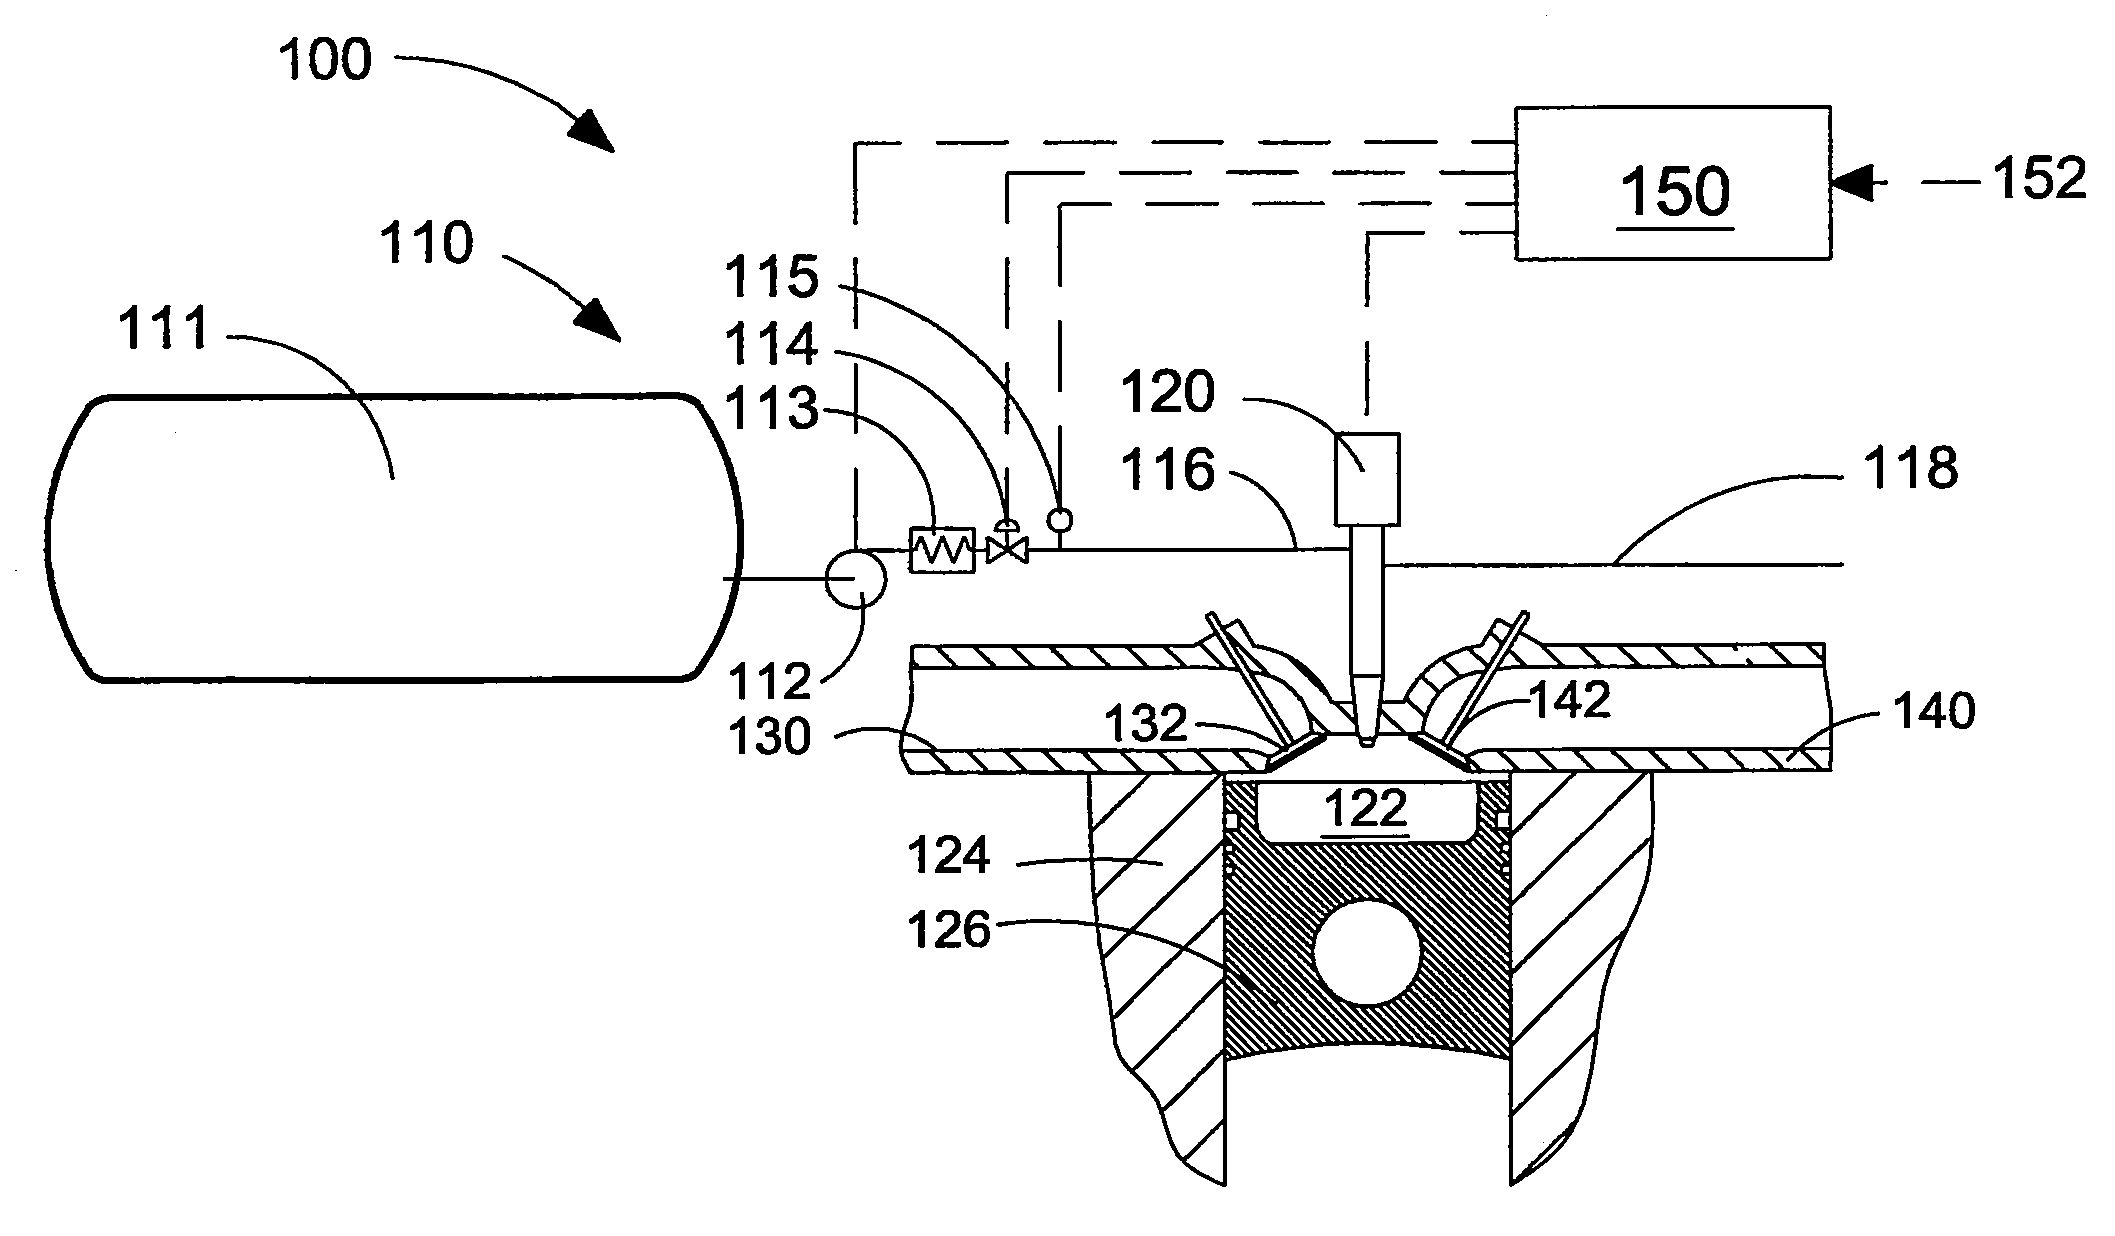 Method And Apparatus Of Fuelling An Internal Combustion Engine With Hydrogen And Methane